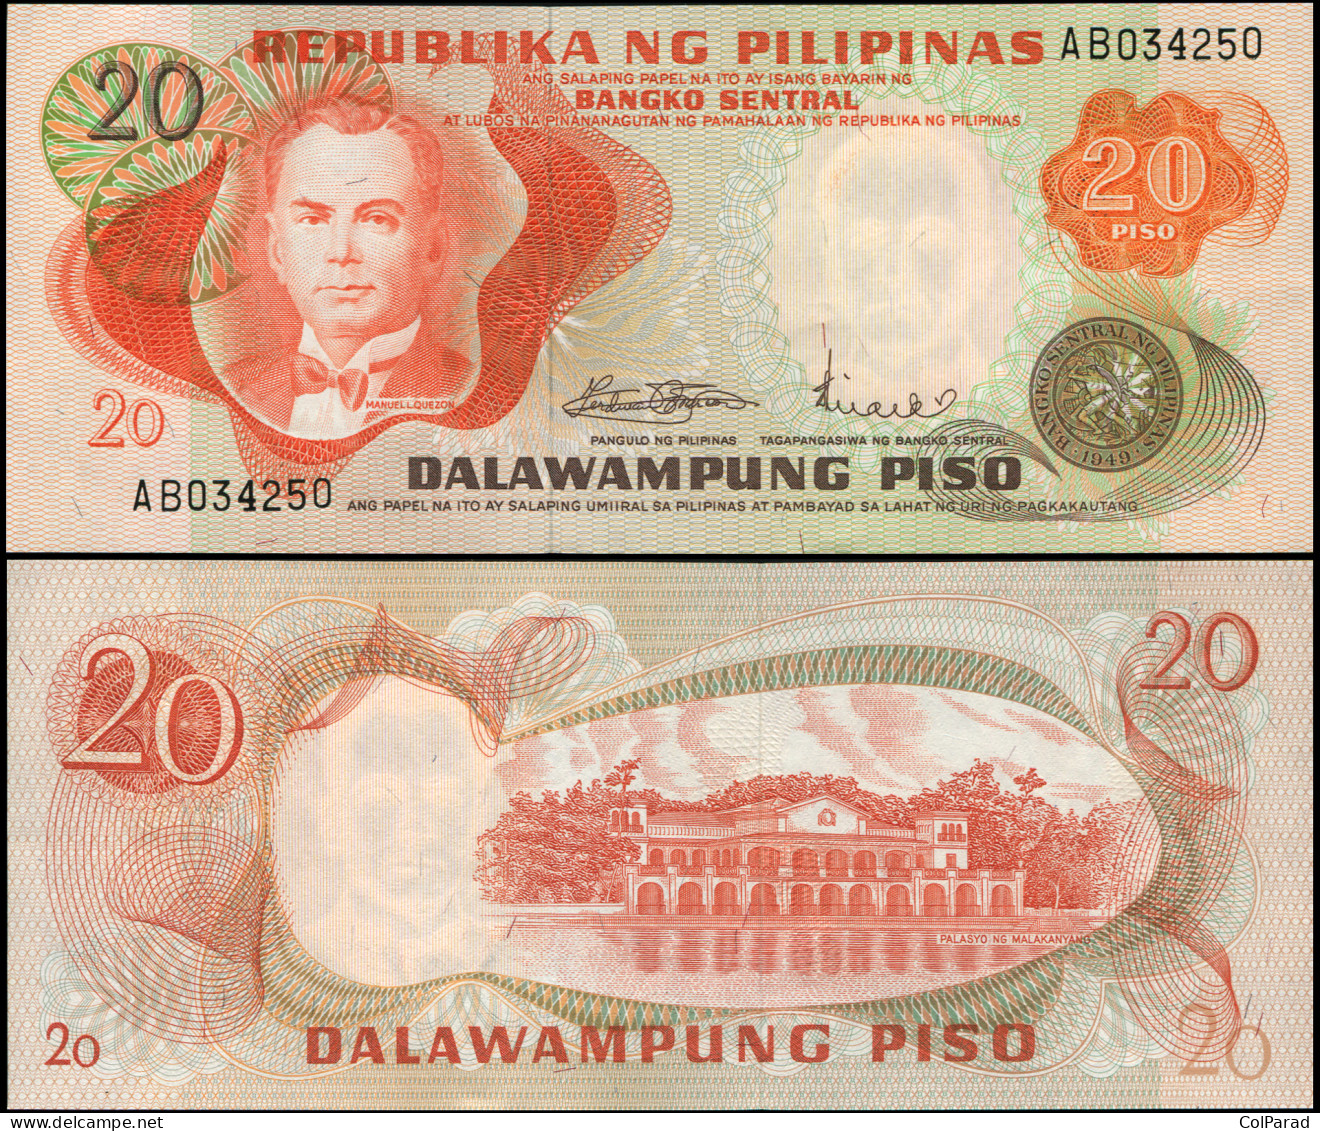 PHILIPPINES 20 PISO - ND (1970) - Paper Unc - P.150a Banknote - Philippinen